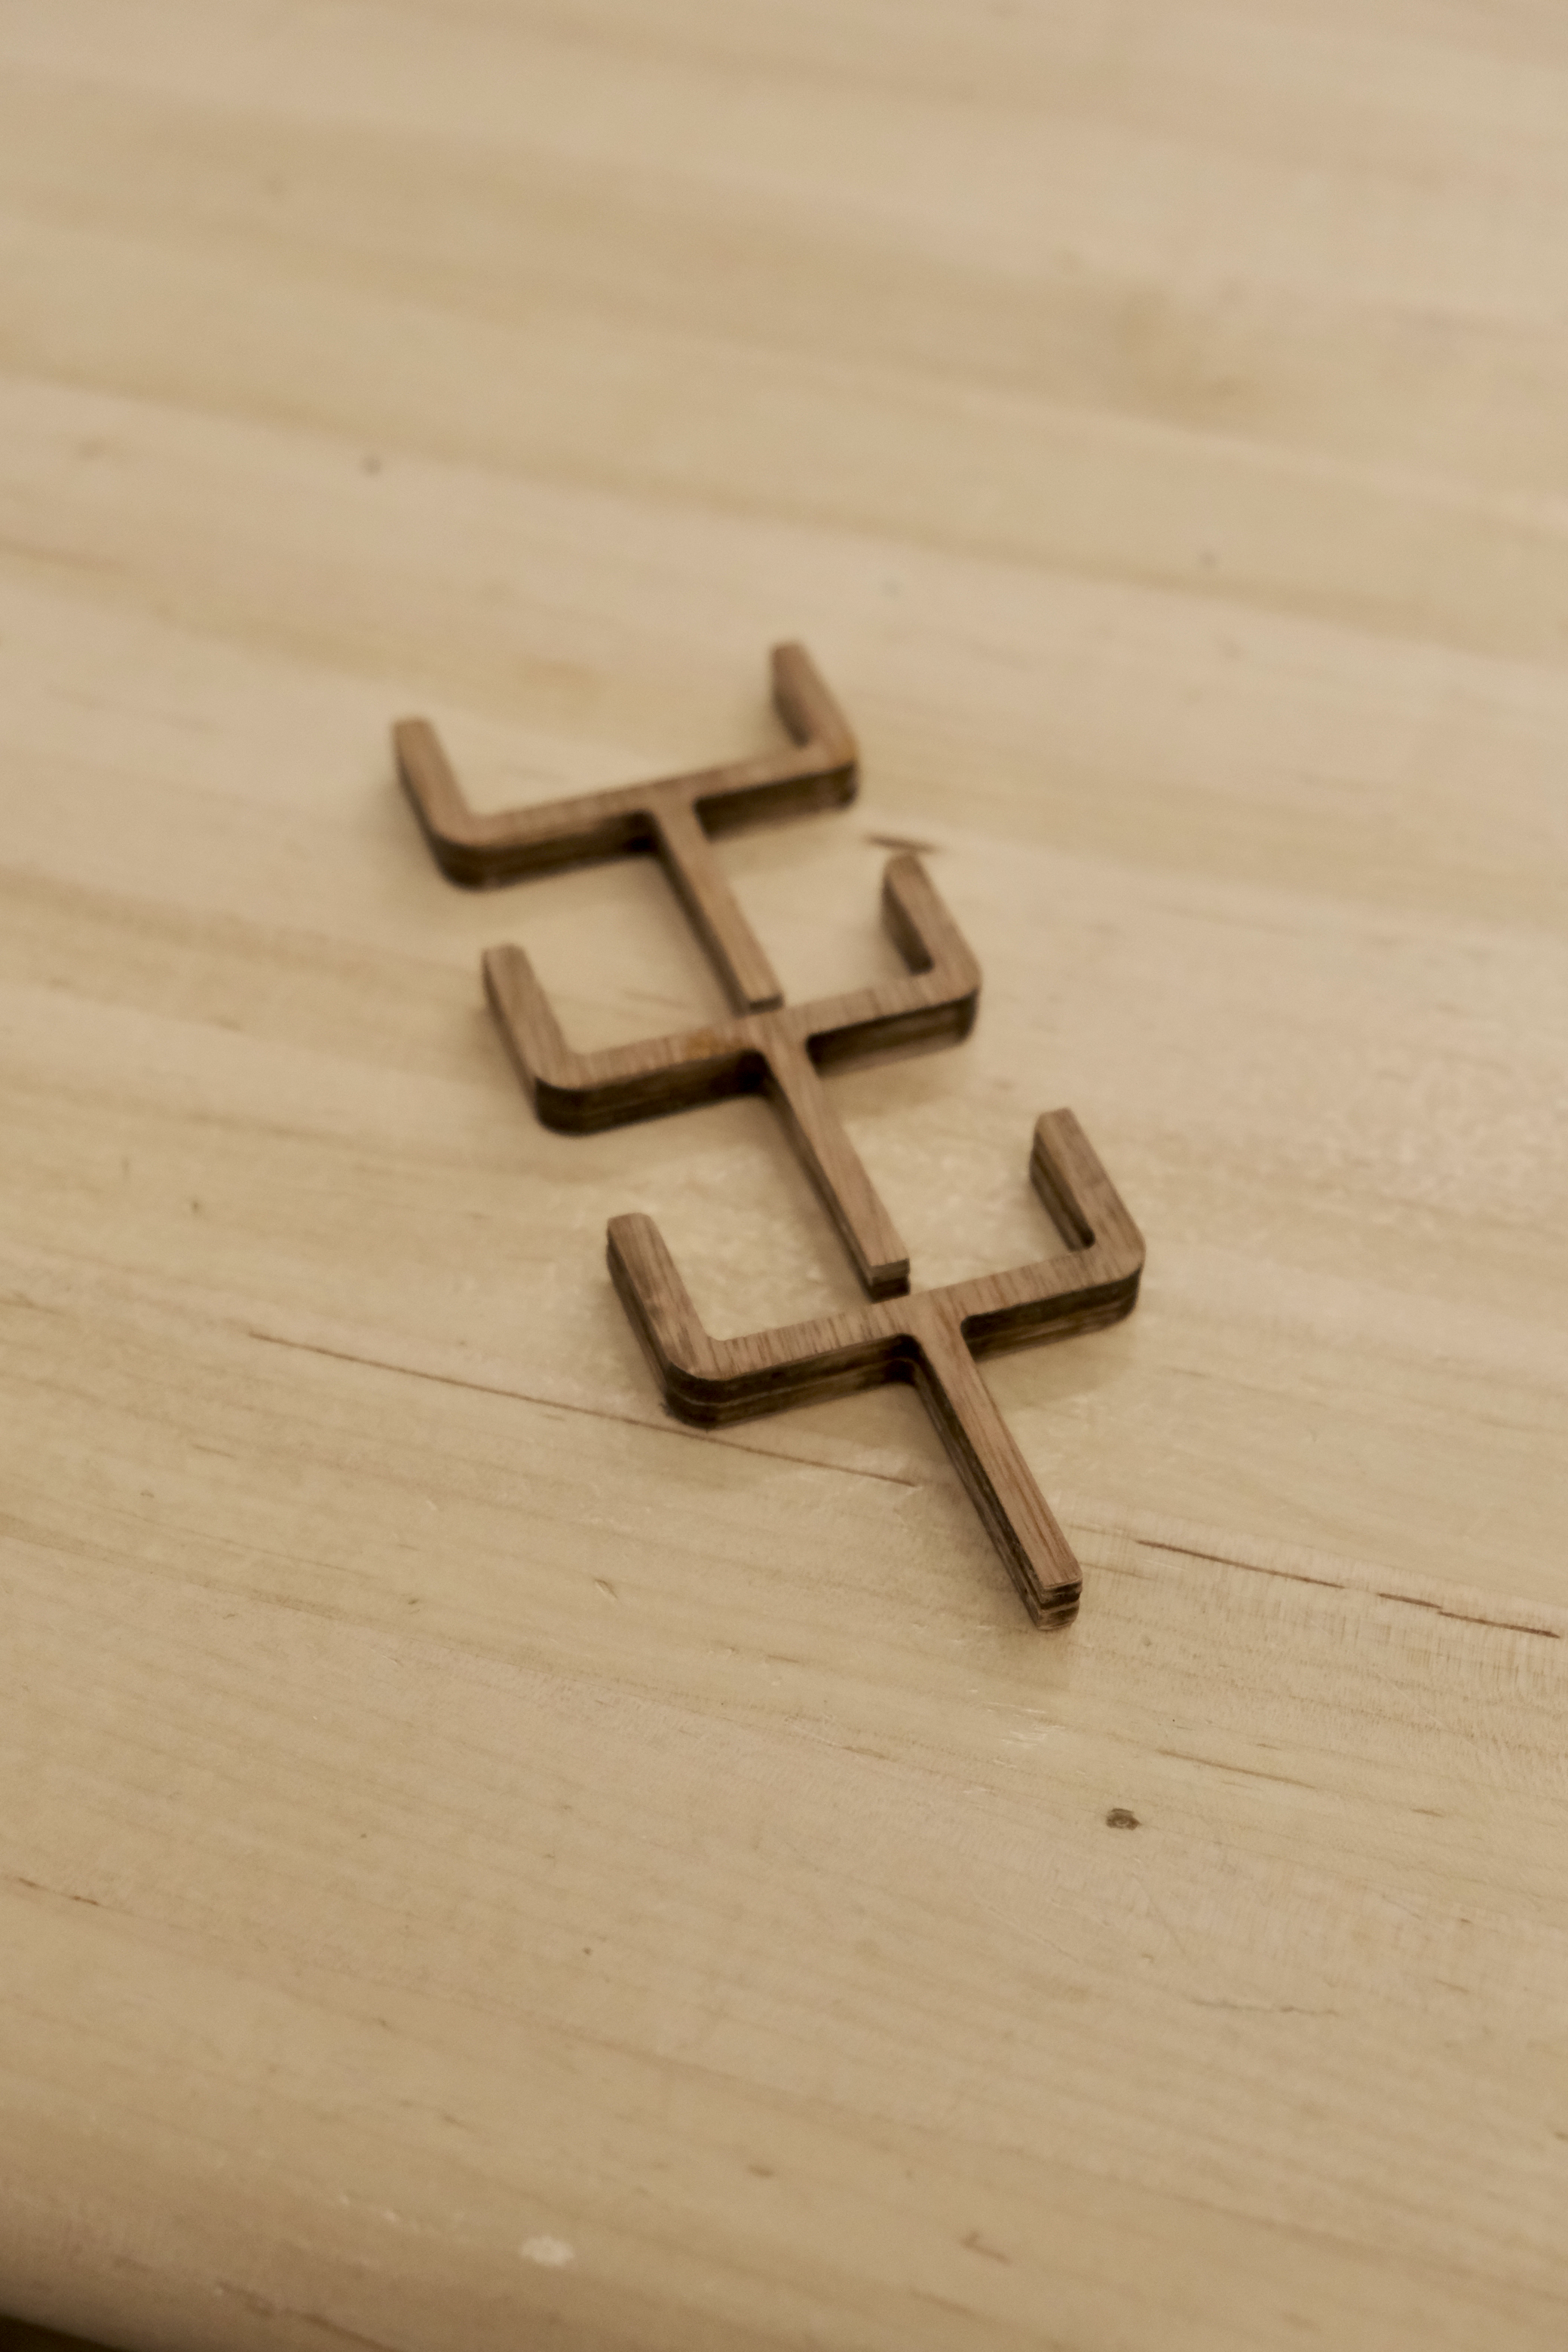 3 laser cut plywood parts designed to hold the power strip. the part has some resemblance to a football goal post